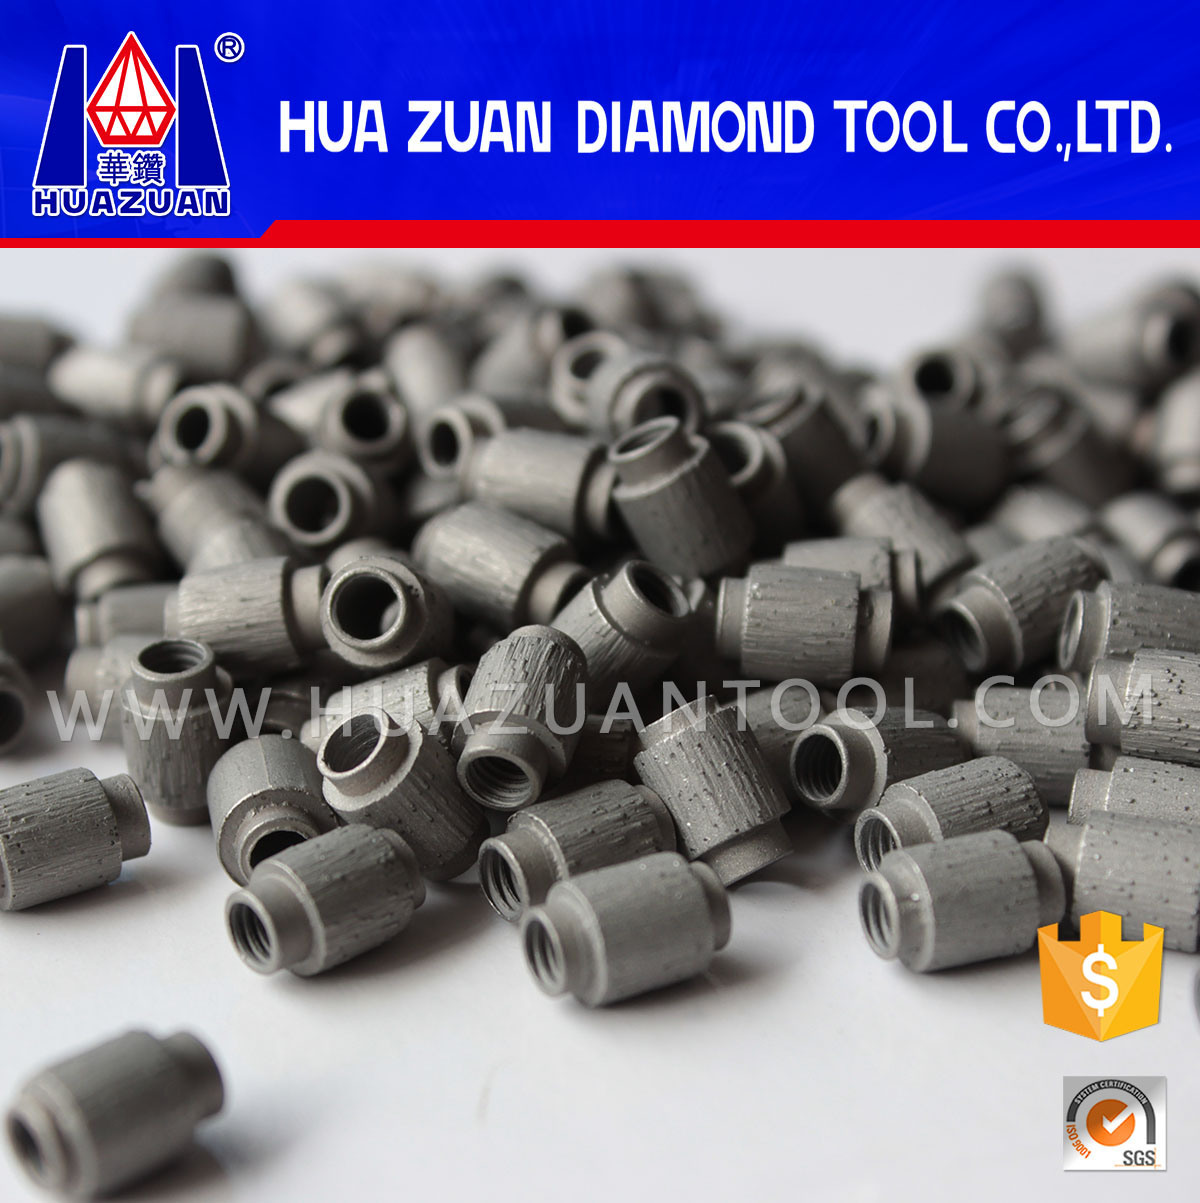 7.2mm Sintered Diamond Wire Saw Beads for Stone Profiling Cutting